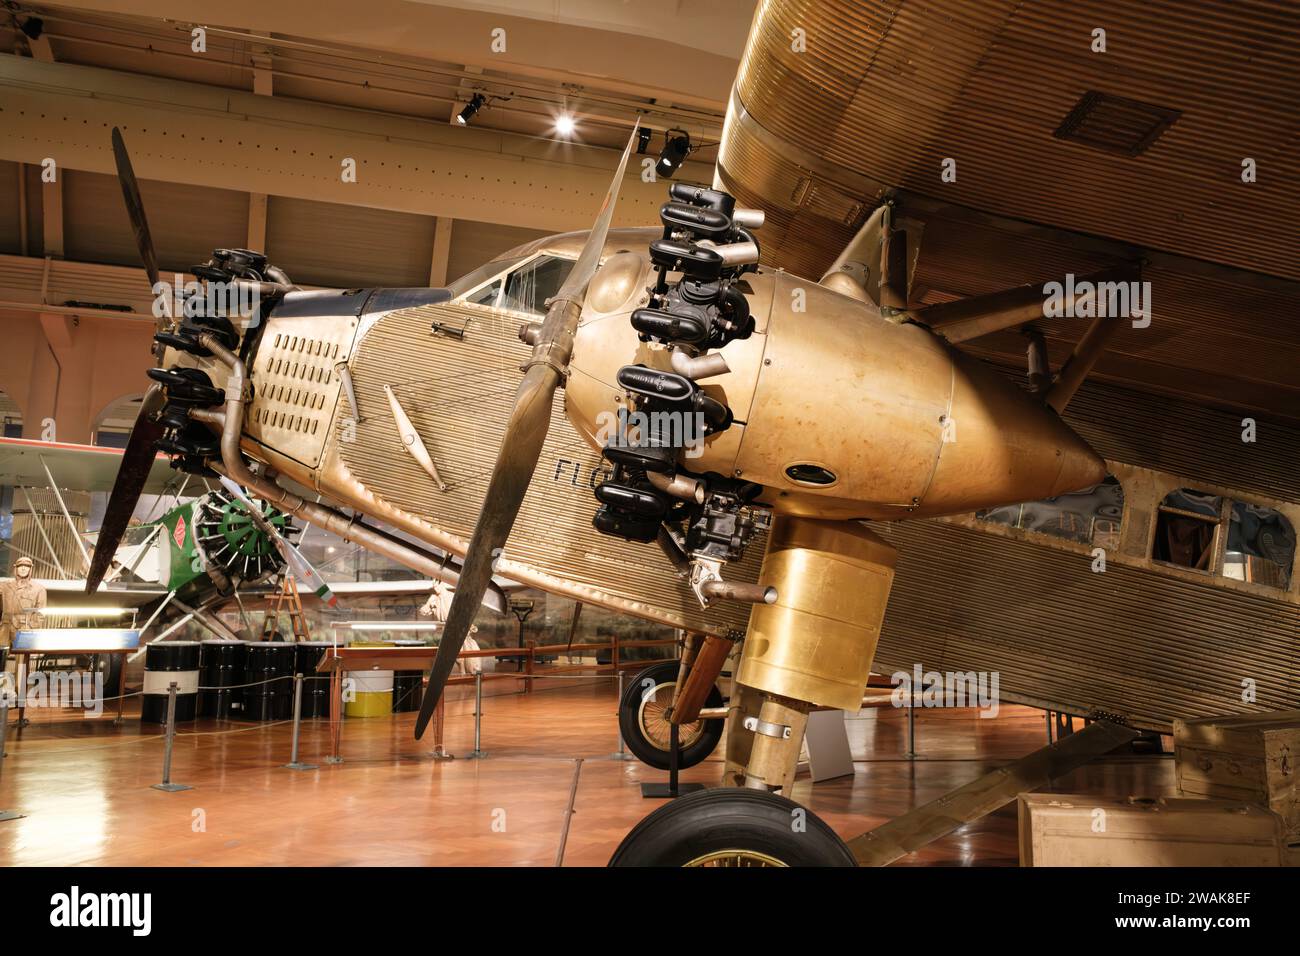 1928 Ford 4-AT-B Tri-Motor airplane, named the Floyd Bennett, on display at the Henry Ford Museum of American Innovation in Dearborn Michigan USA Stock Photo